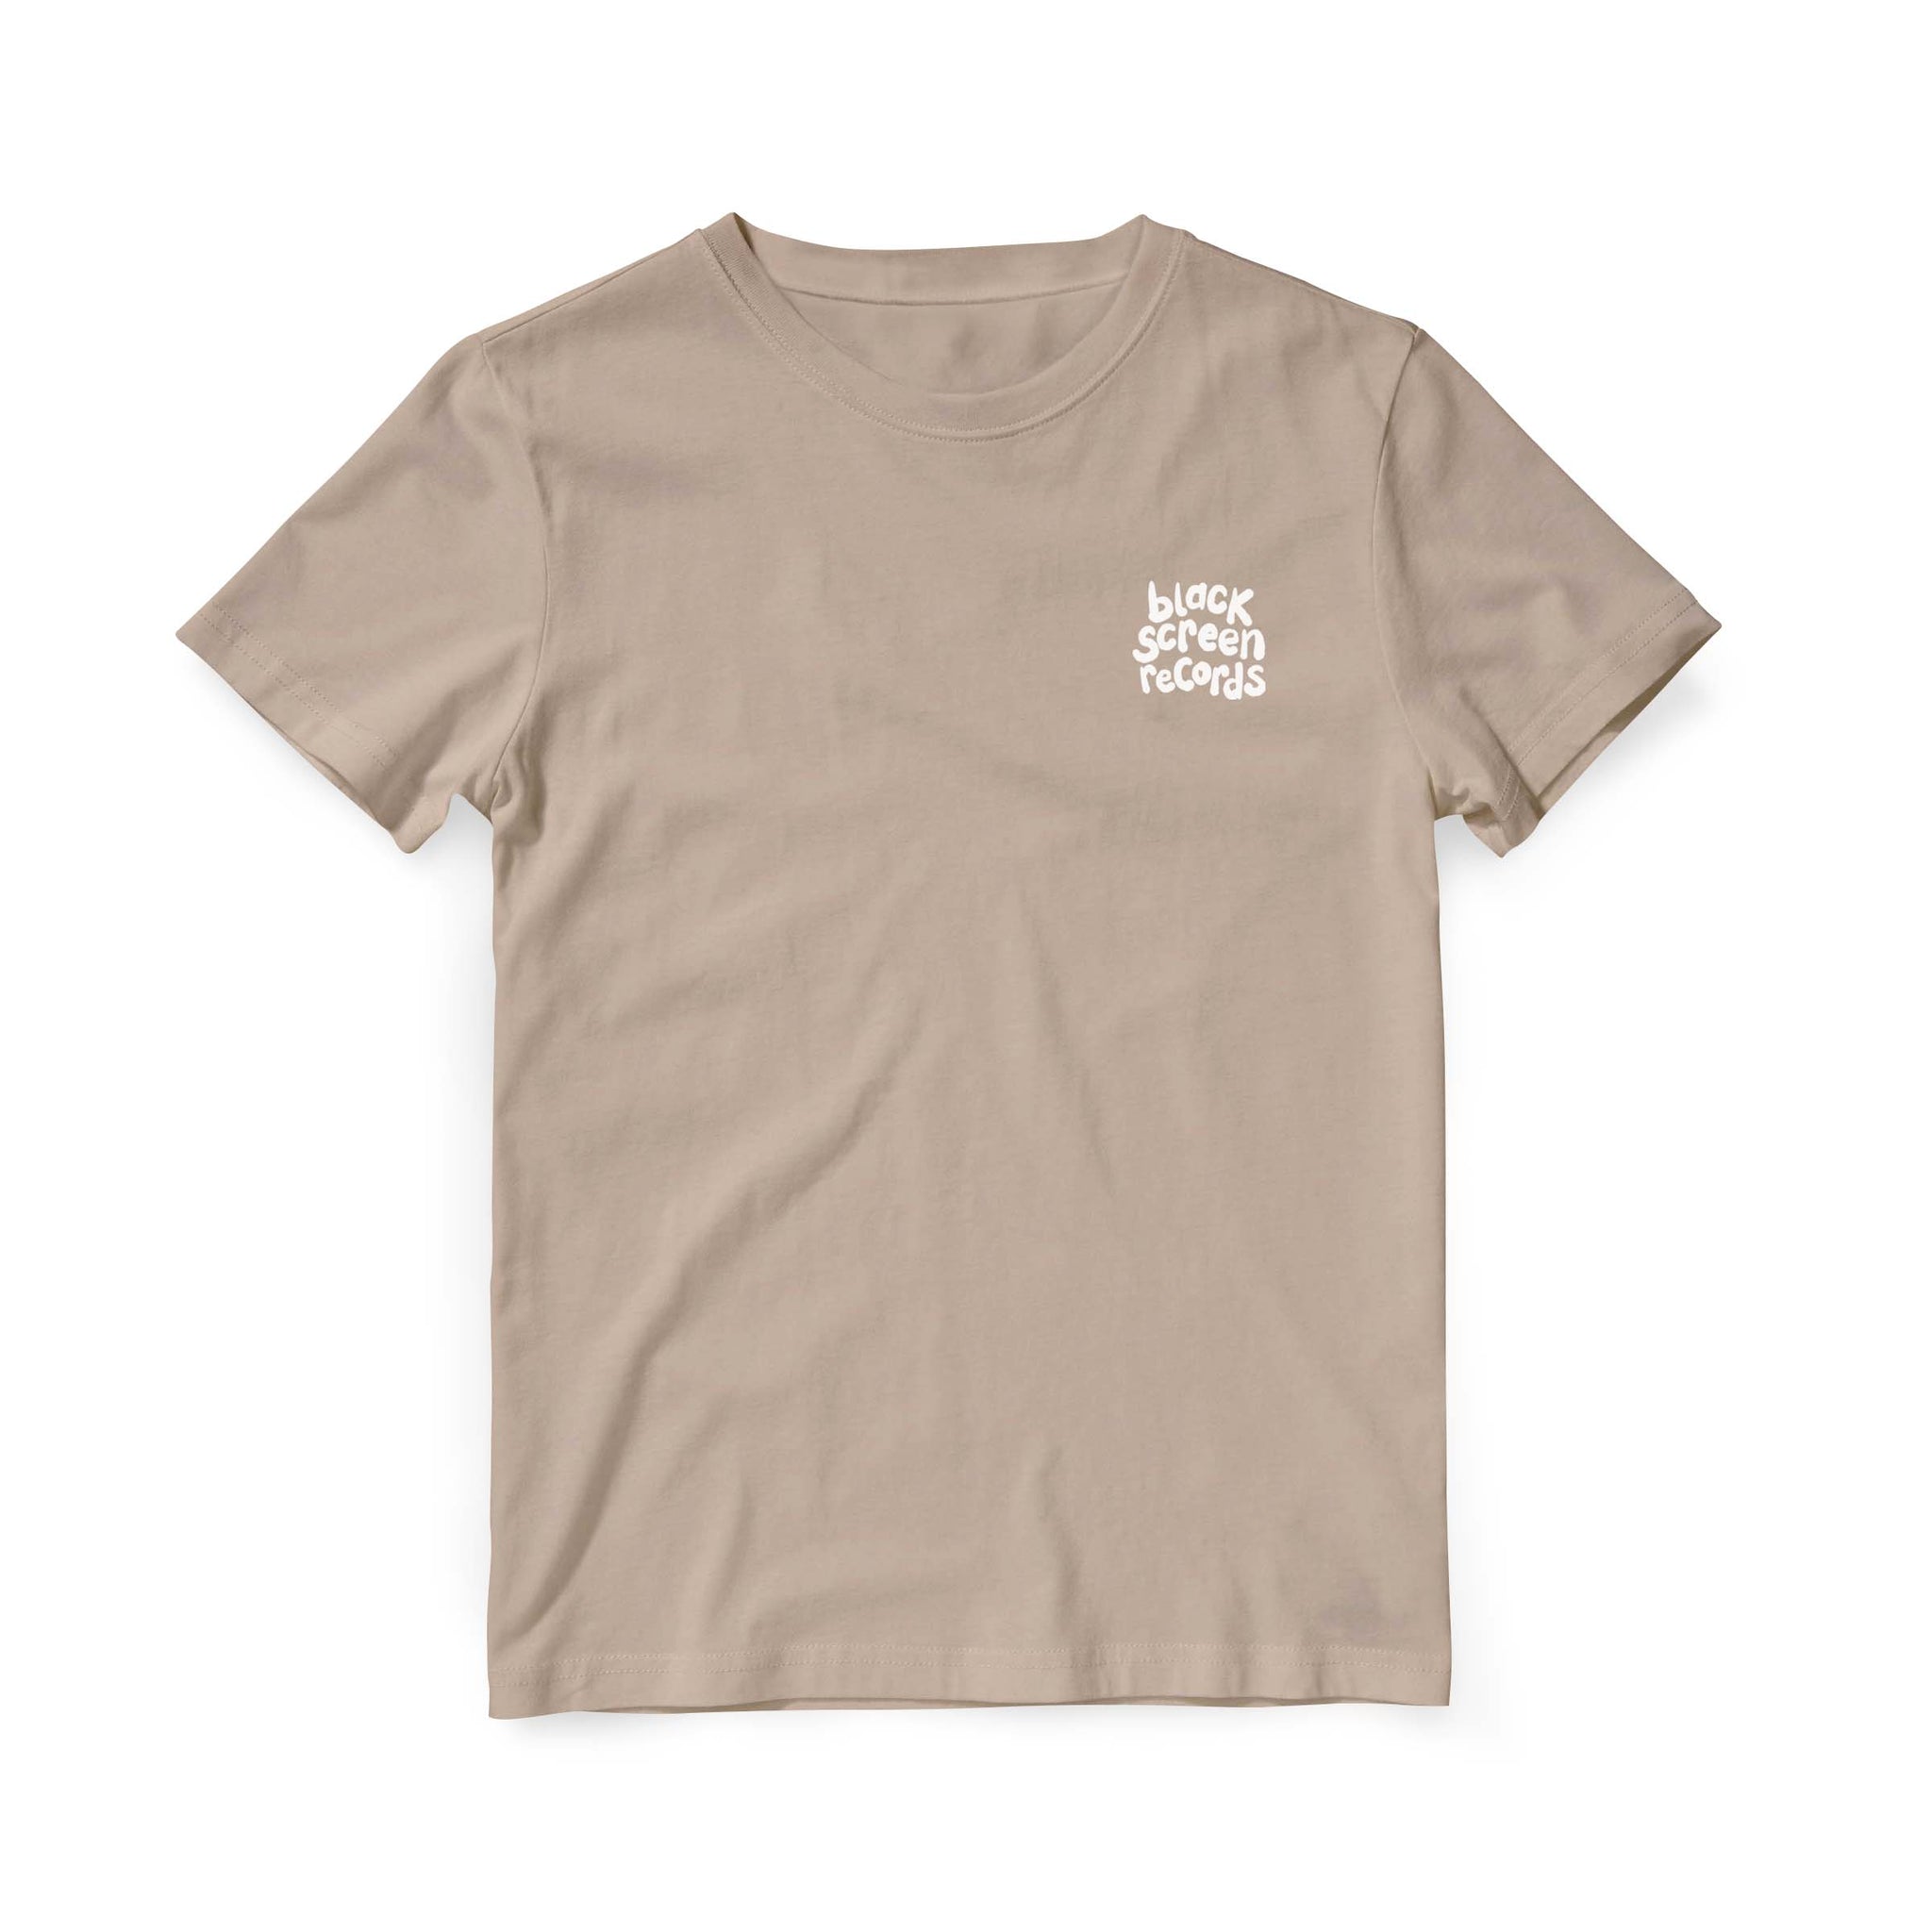 light beige t-shirt with embroidered black screen records logo